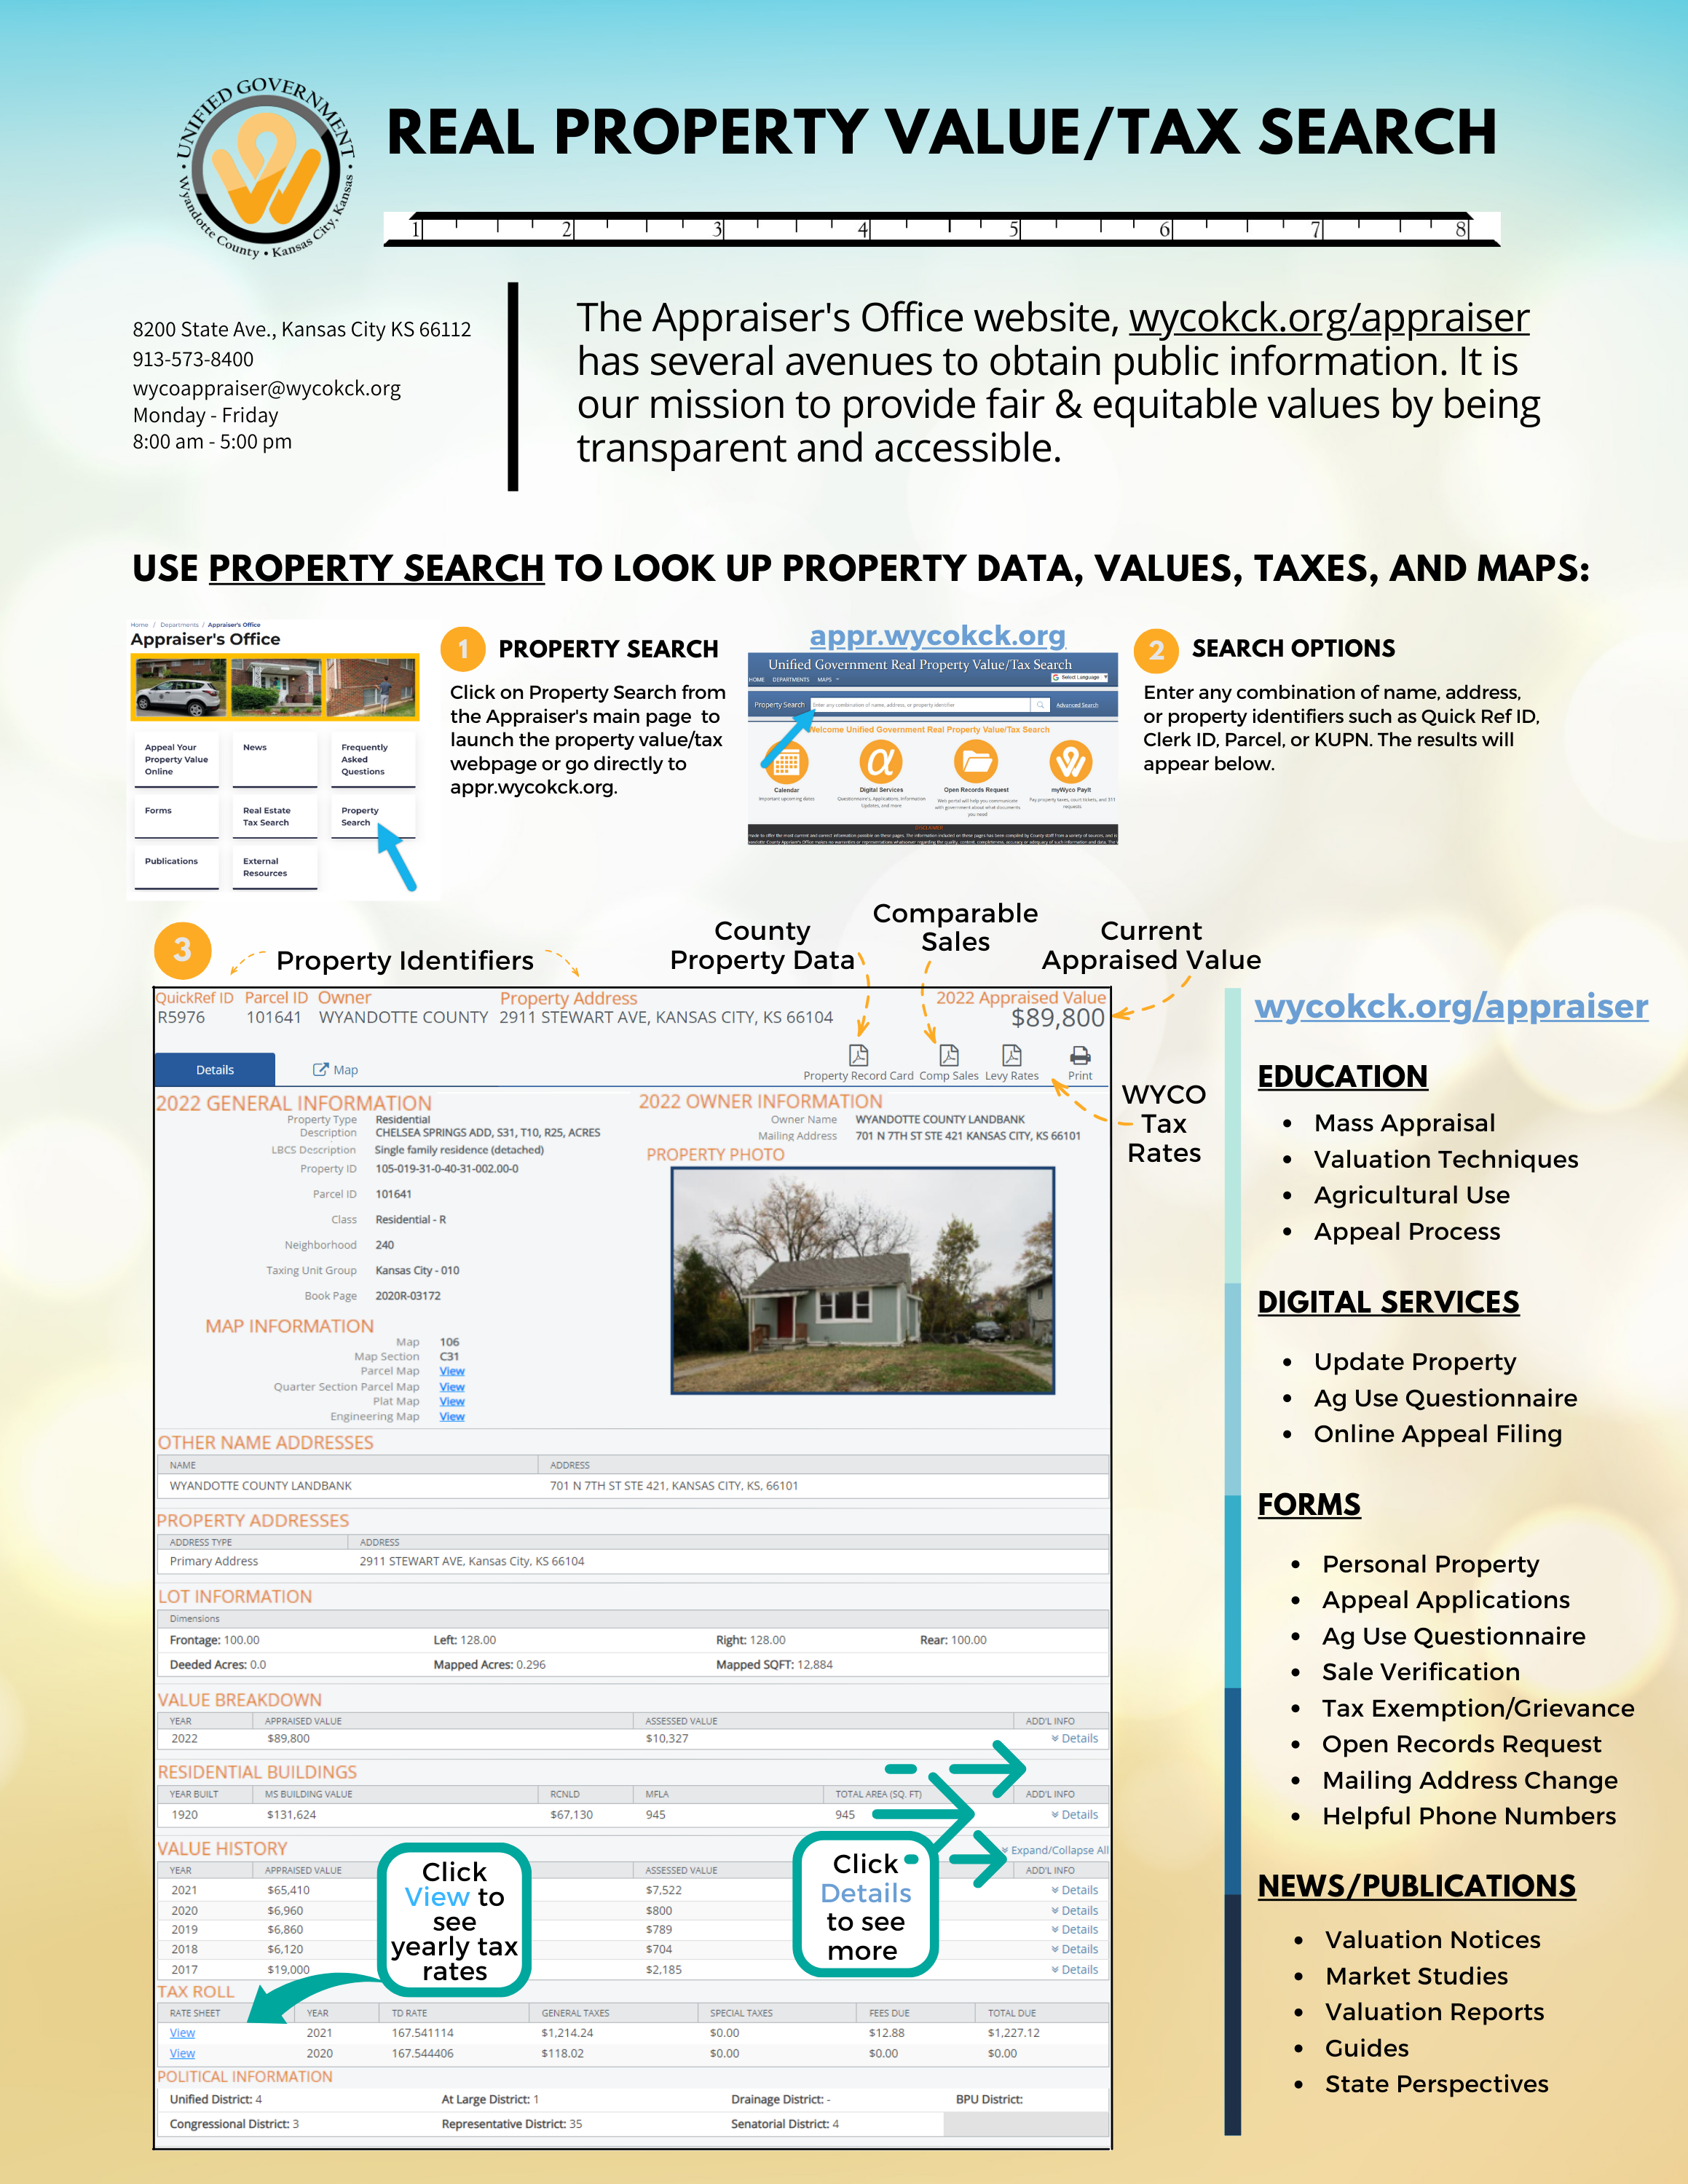 Real property value/tax search flyer on how to navigate the Appraiser's Office webpages